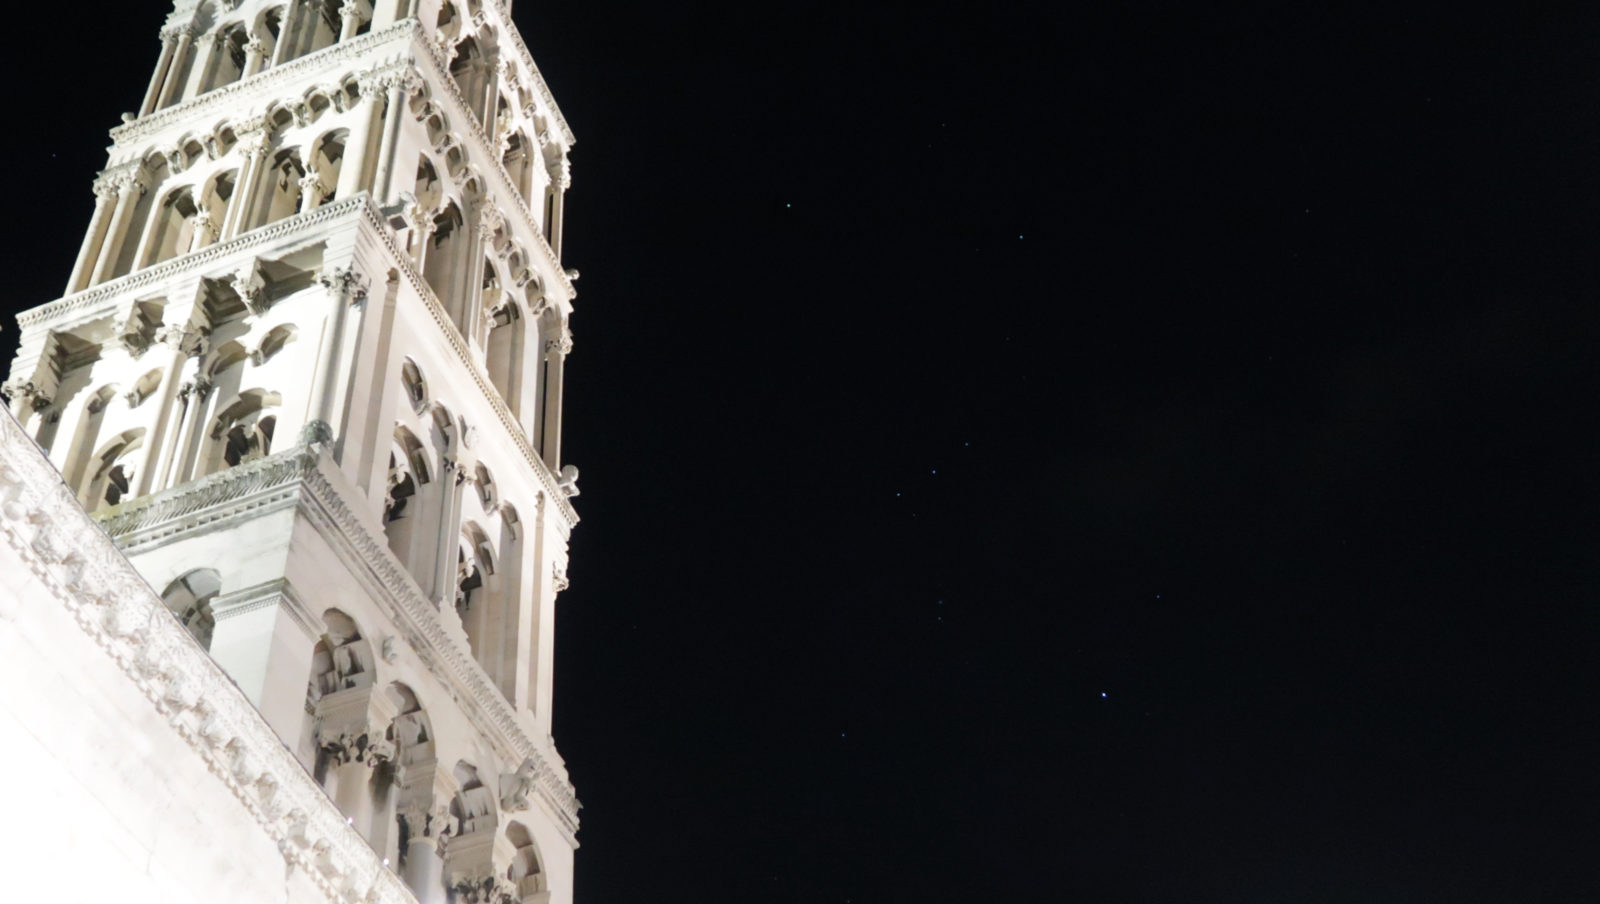 New Year in Split. Diocletian's Palace and Orion. Photo: Sanjin Đumišić.